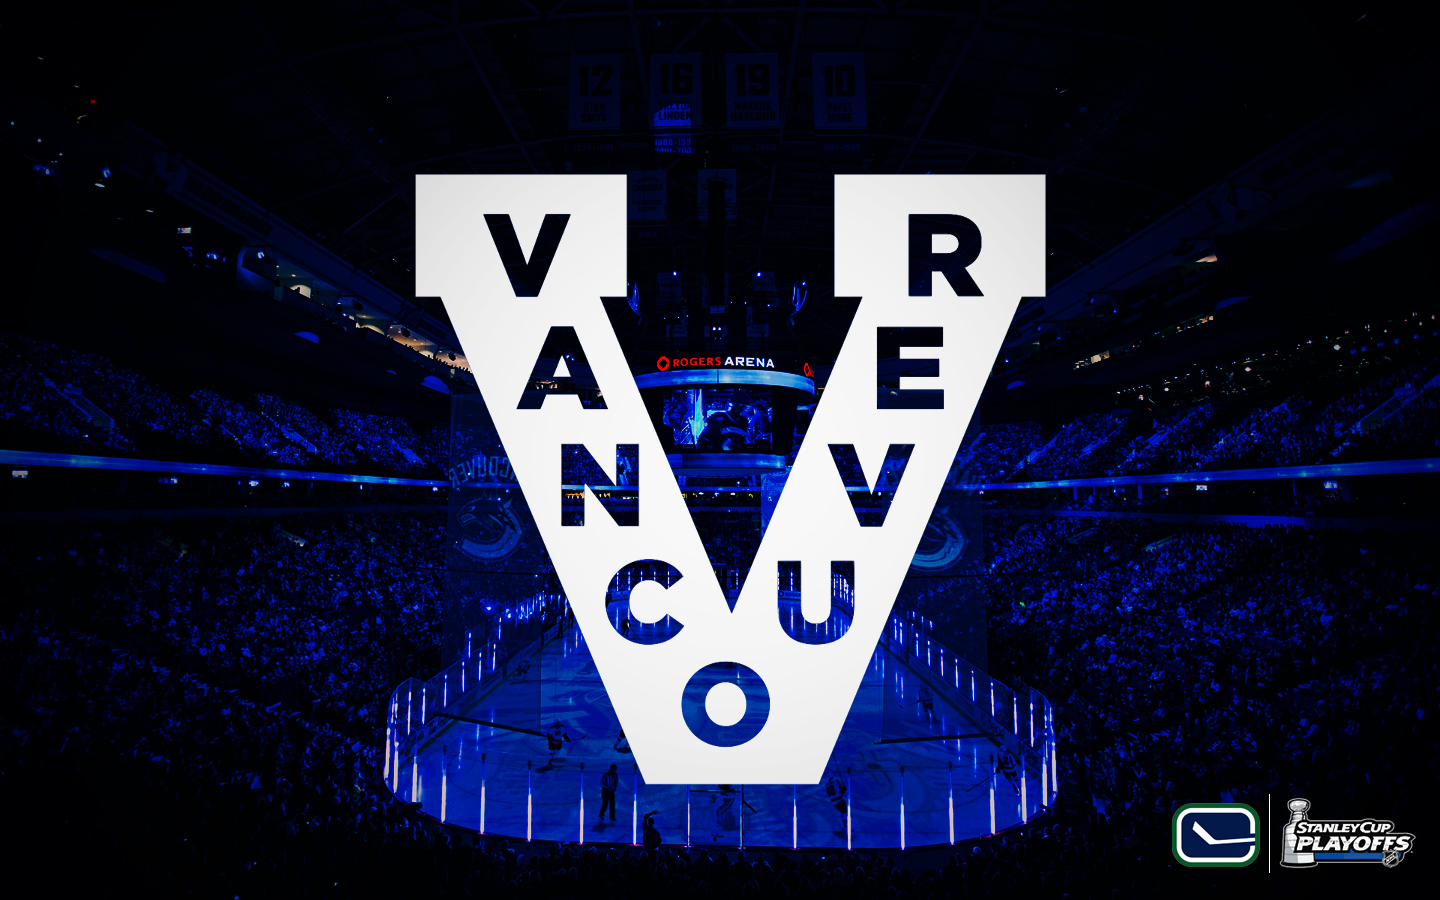 canucks_arena_millionaires_wallpaper_by_